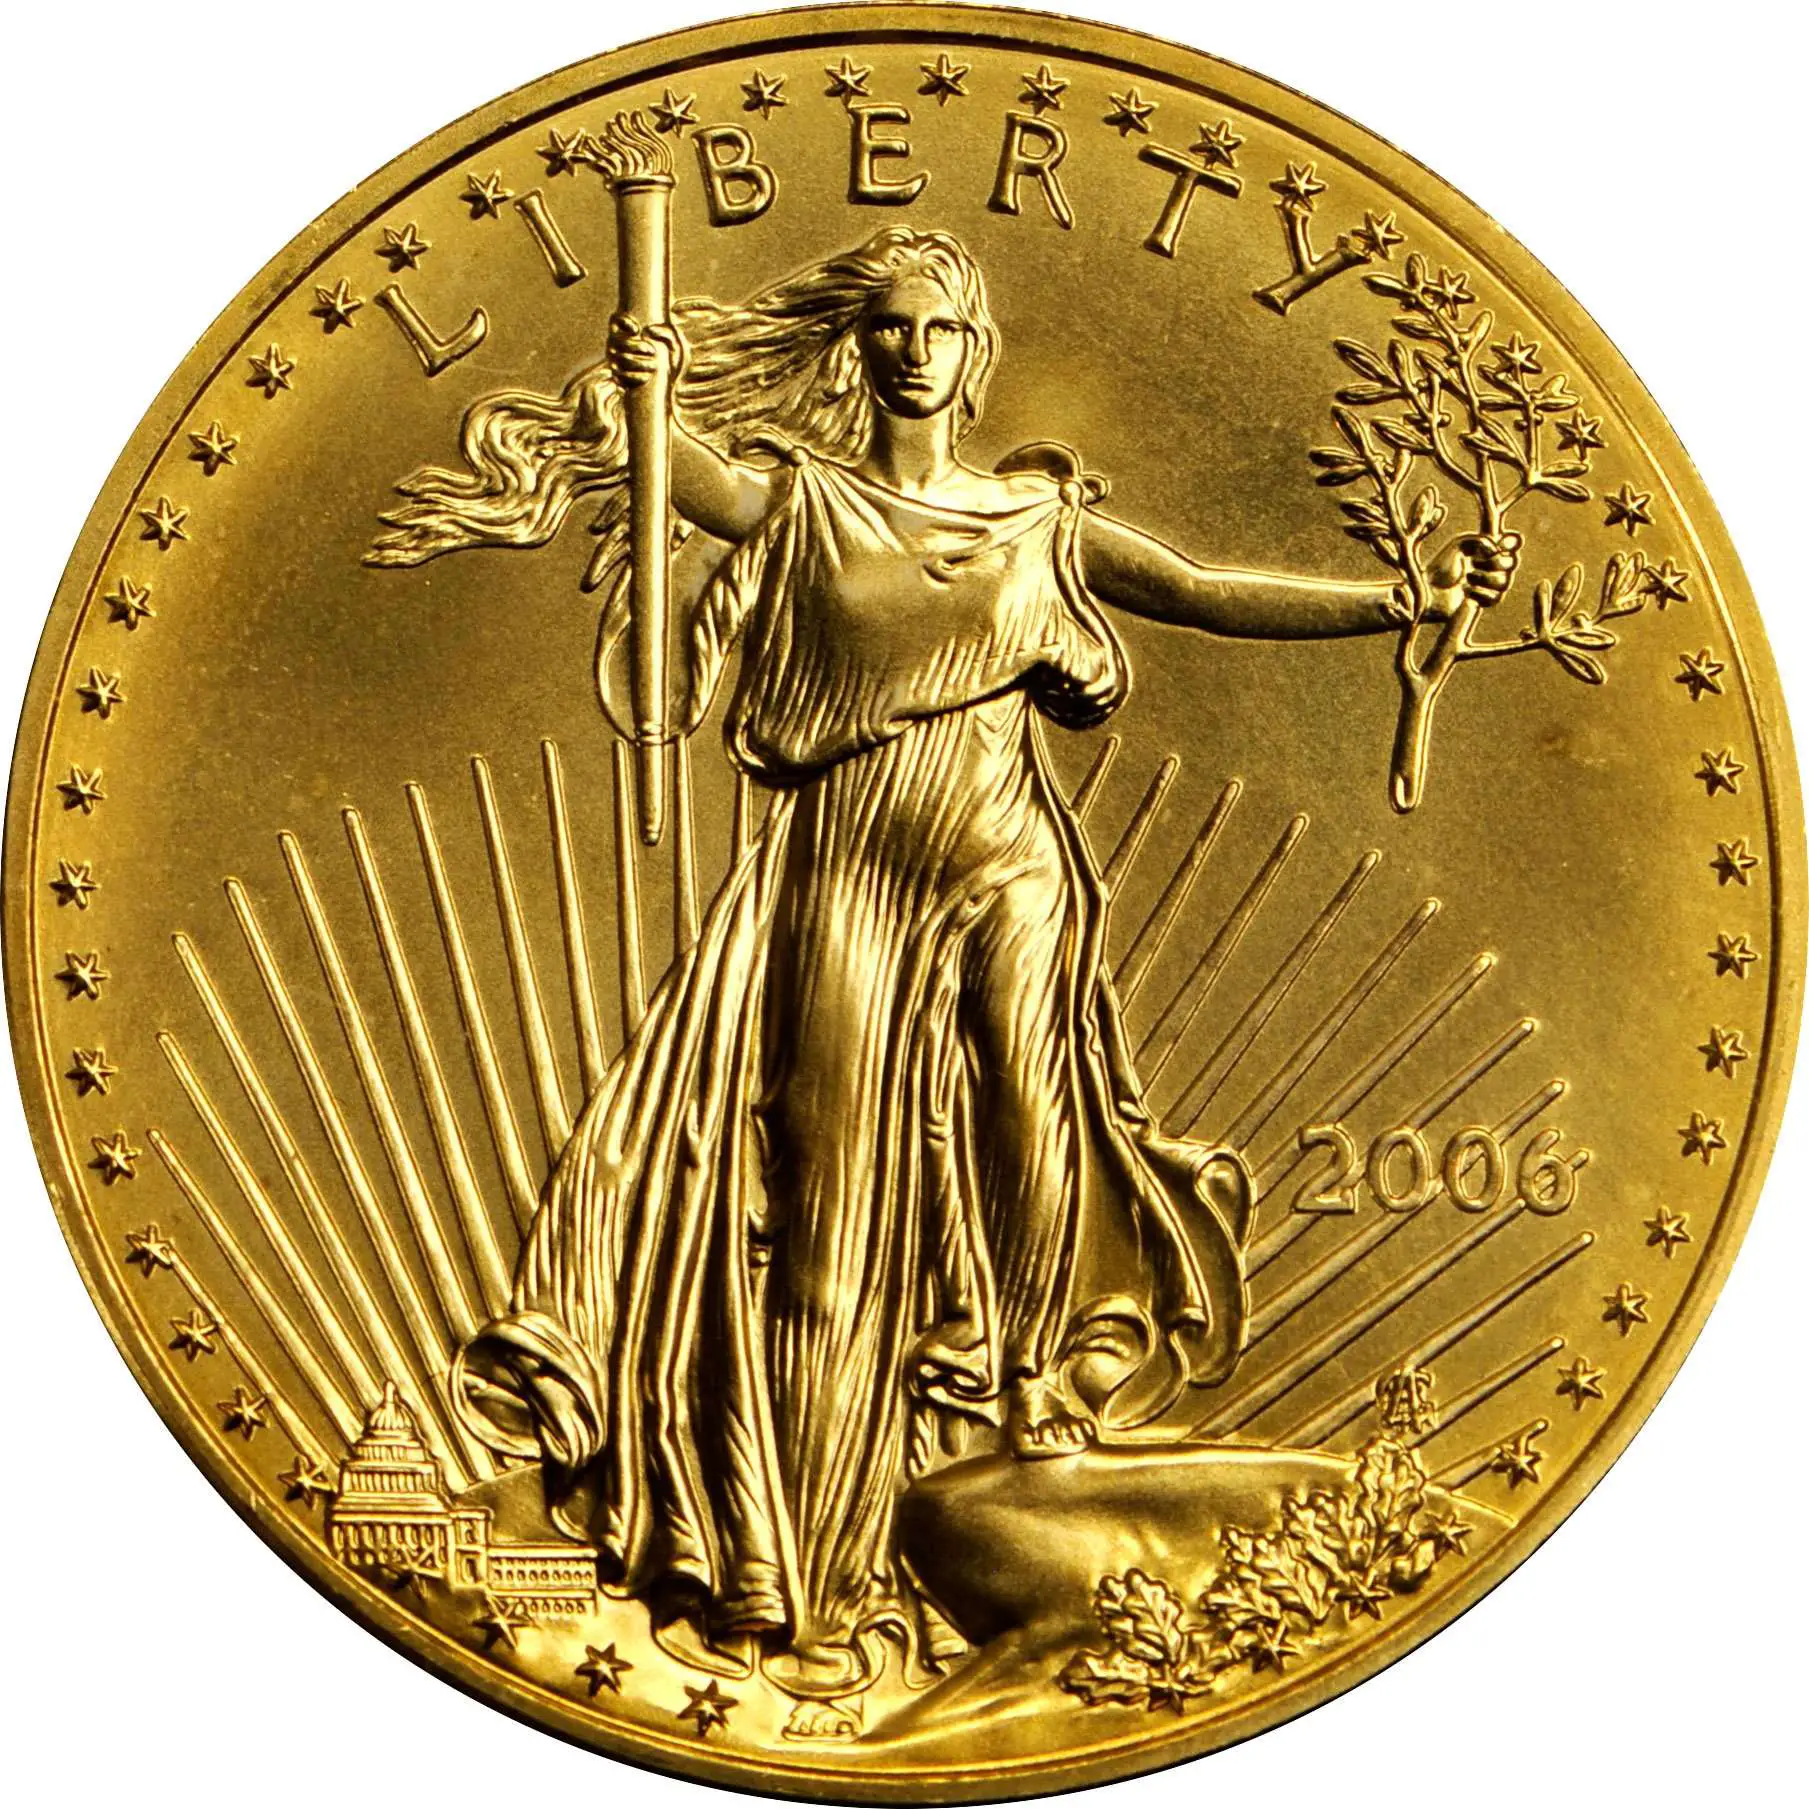 Value of 2006 $5 Gold Coin